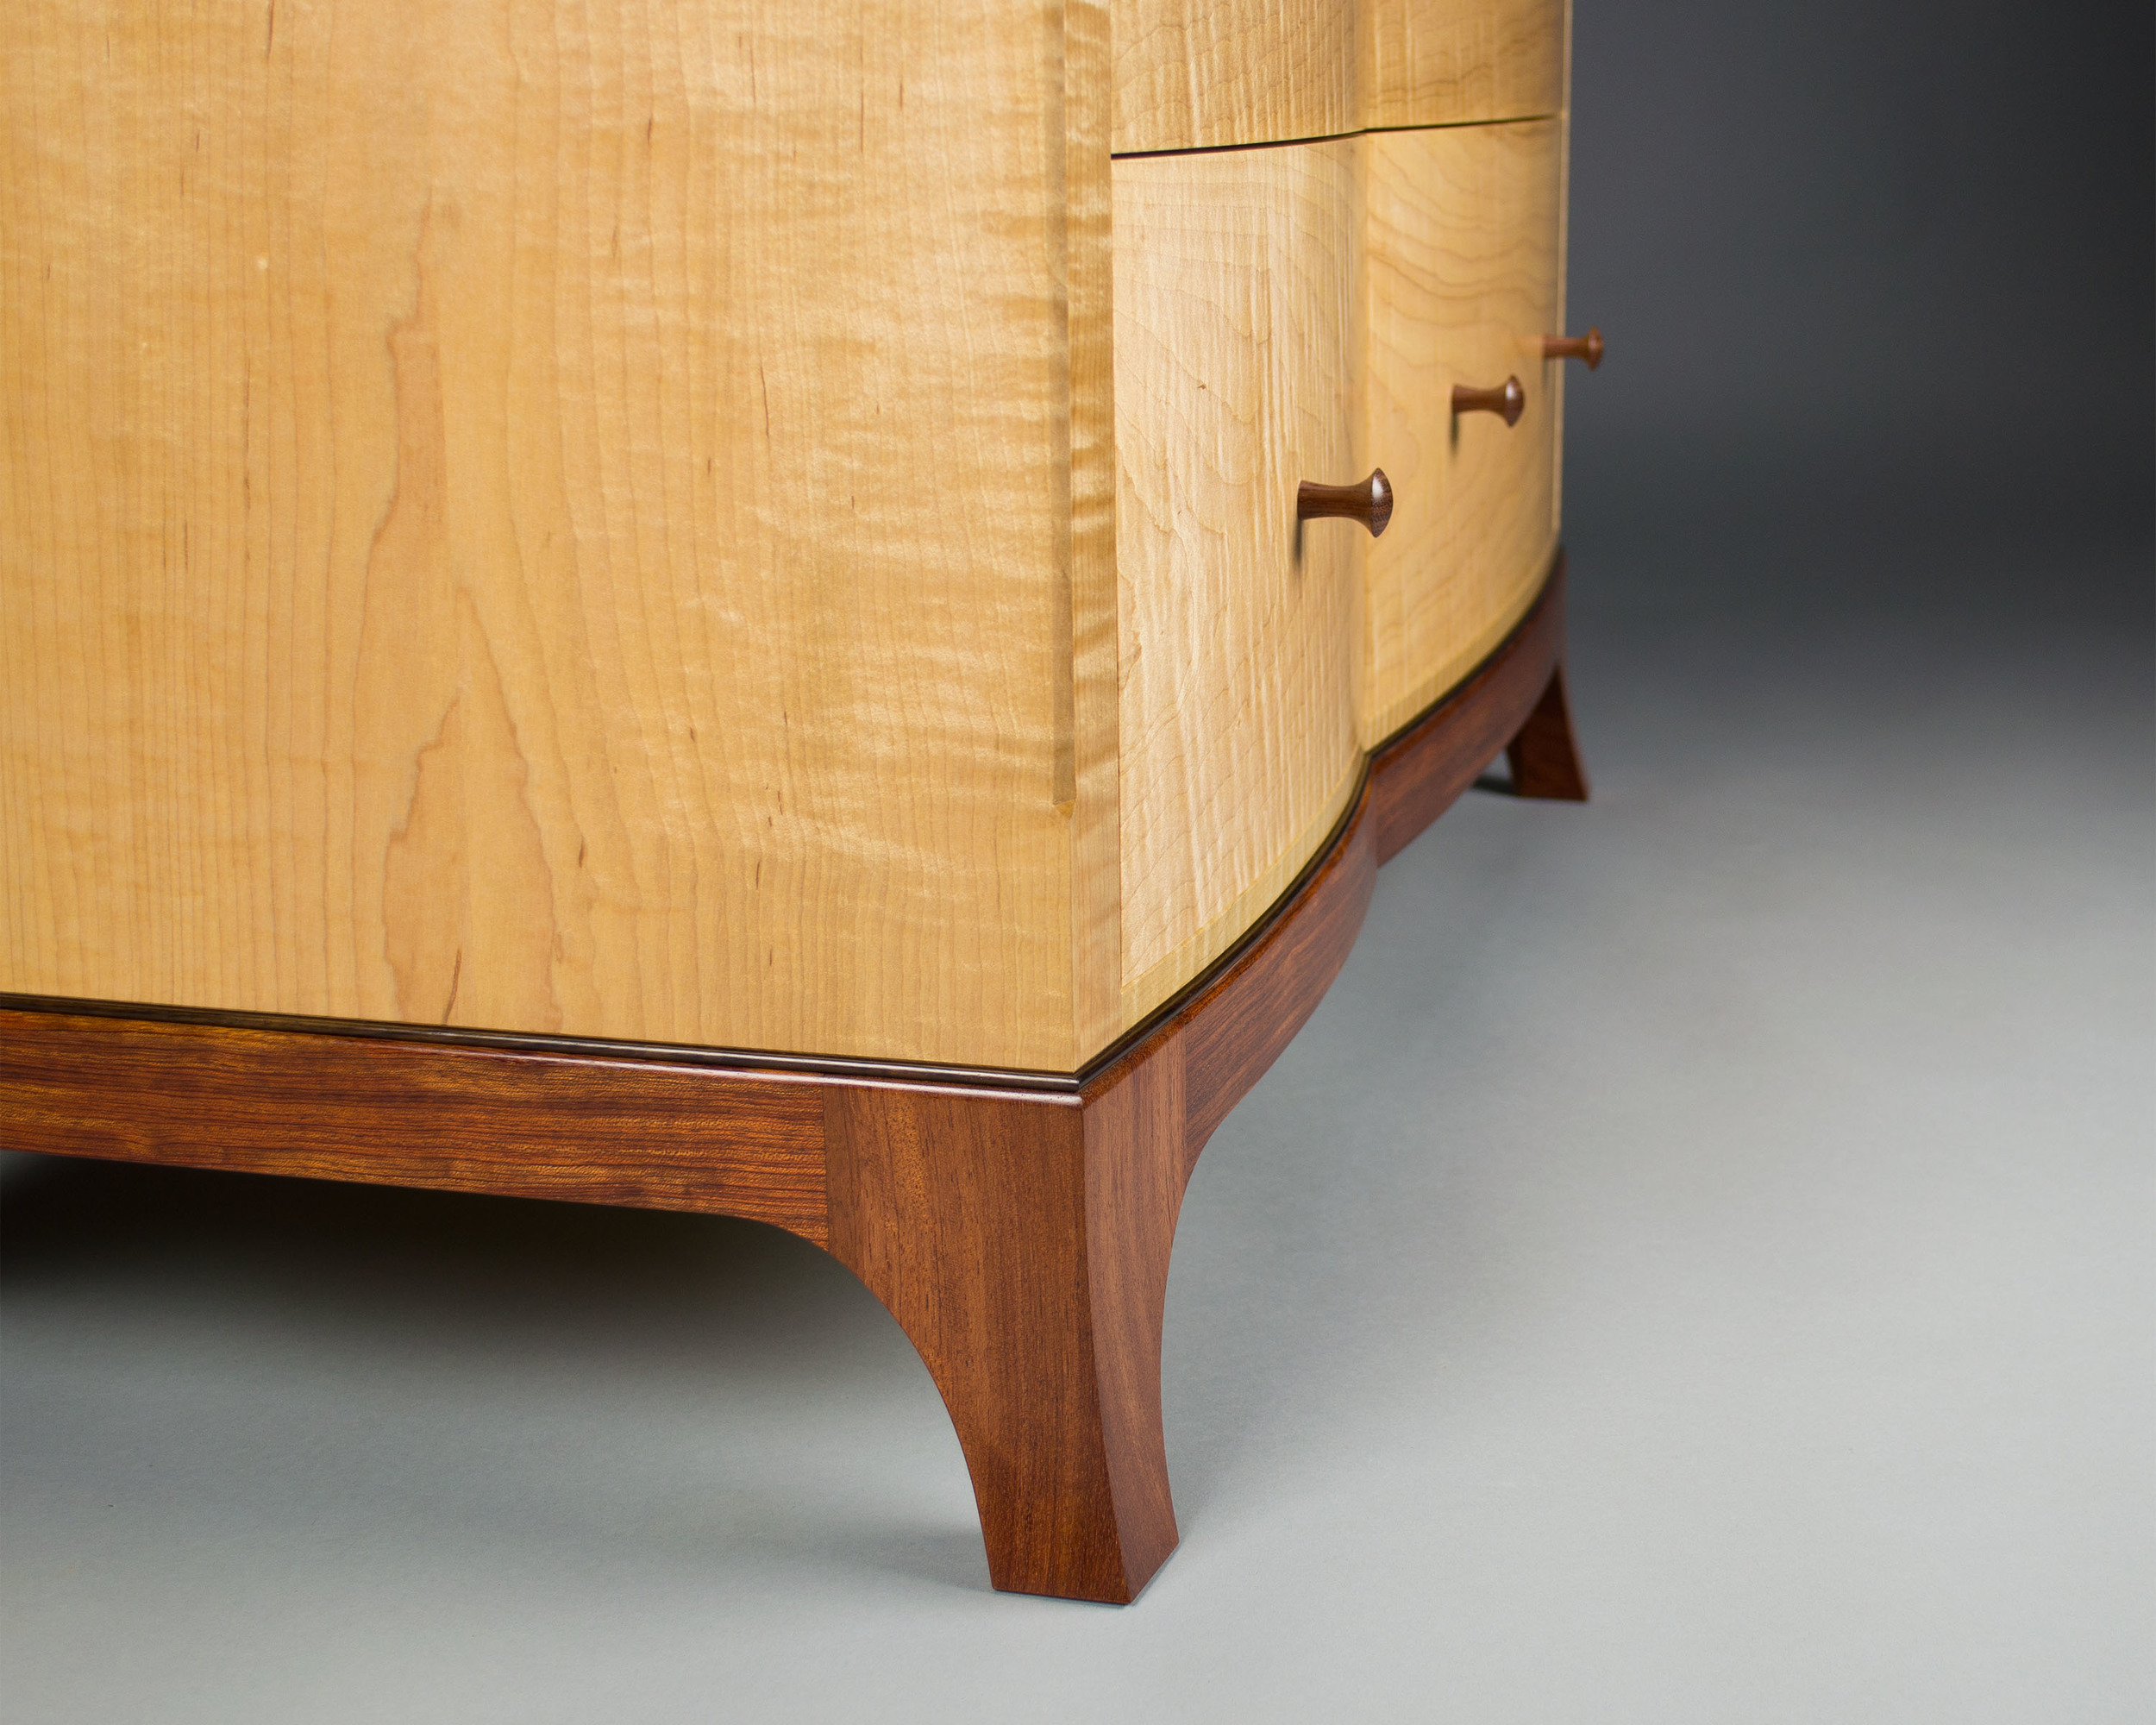  The bubinga and rosewood base is shaped to mirror the curves of the drawer fronts as well. 